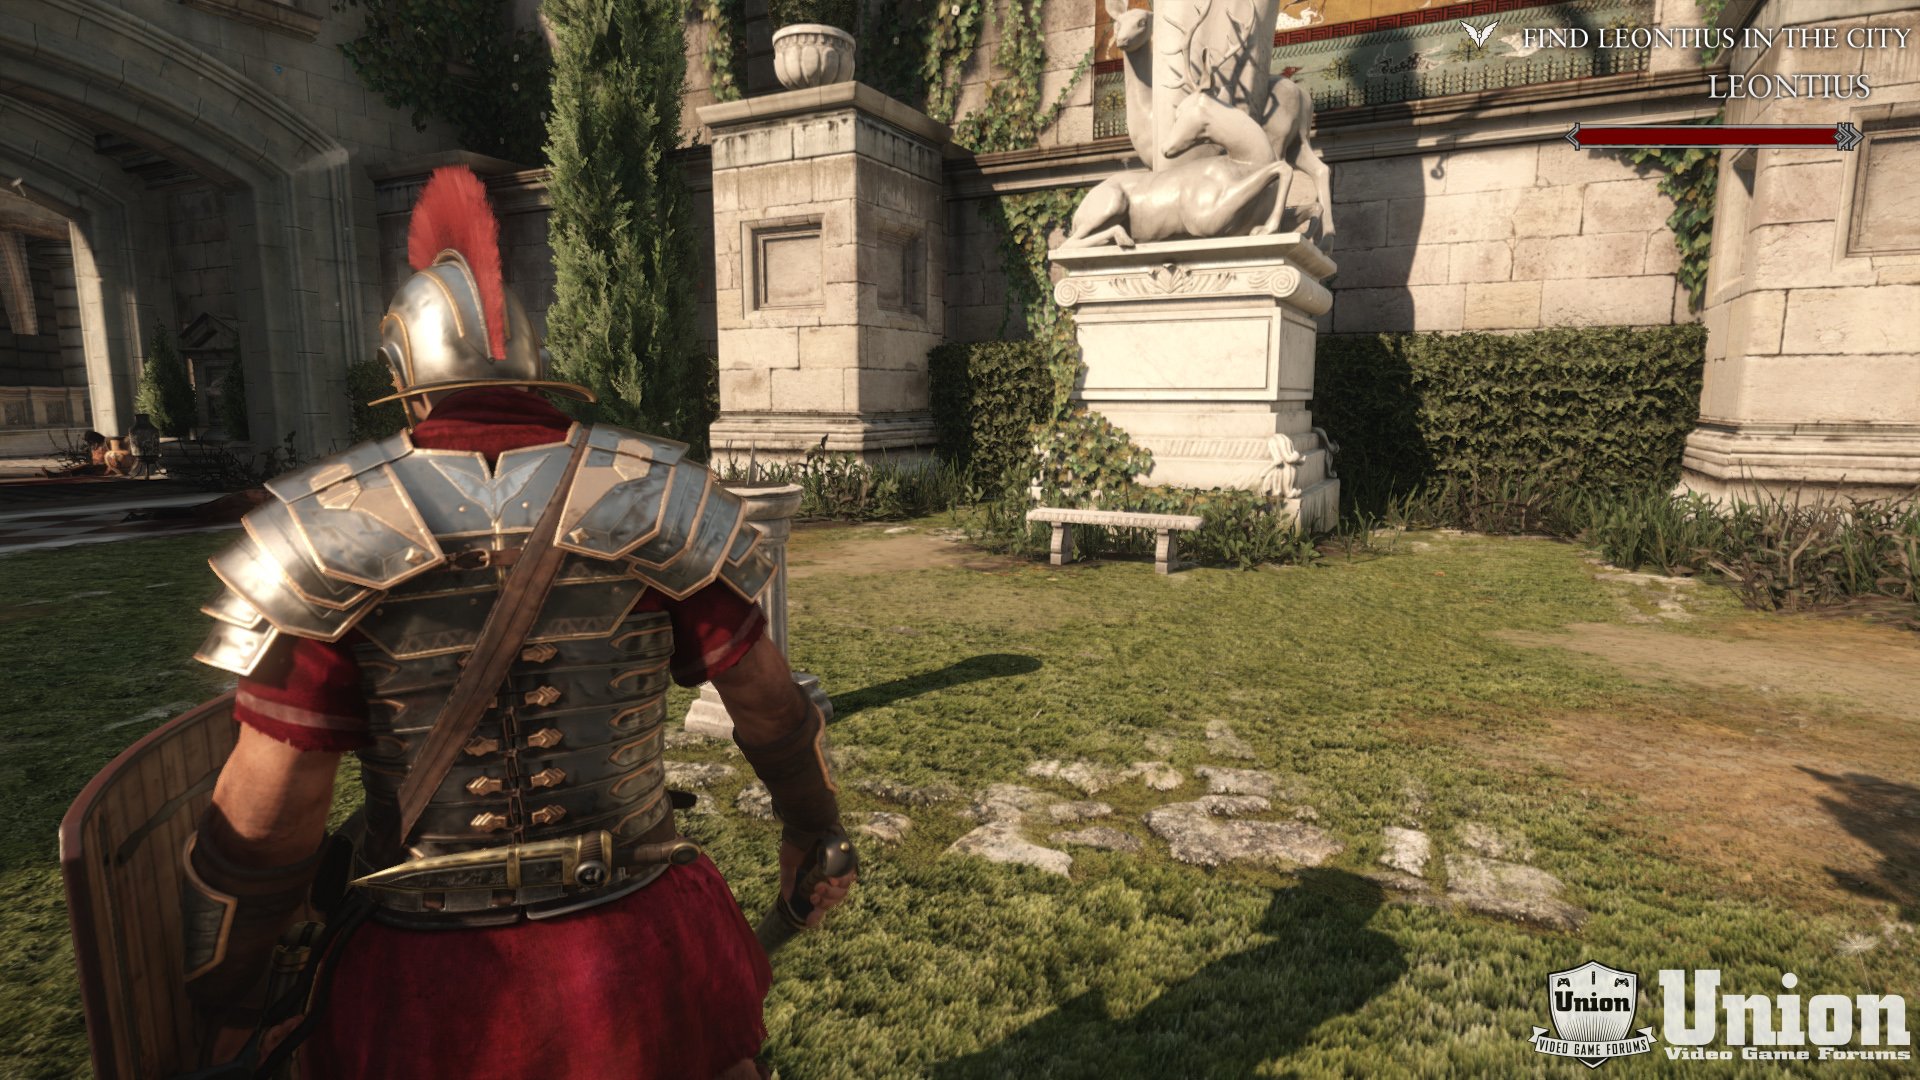 Ryse: Son of Rome PC